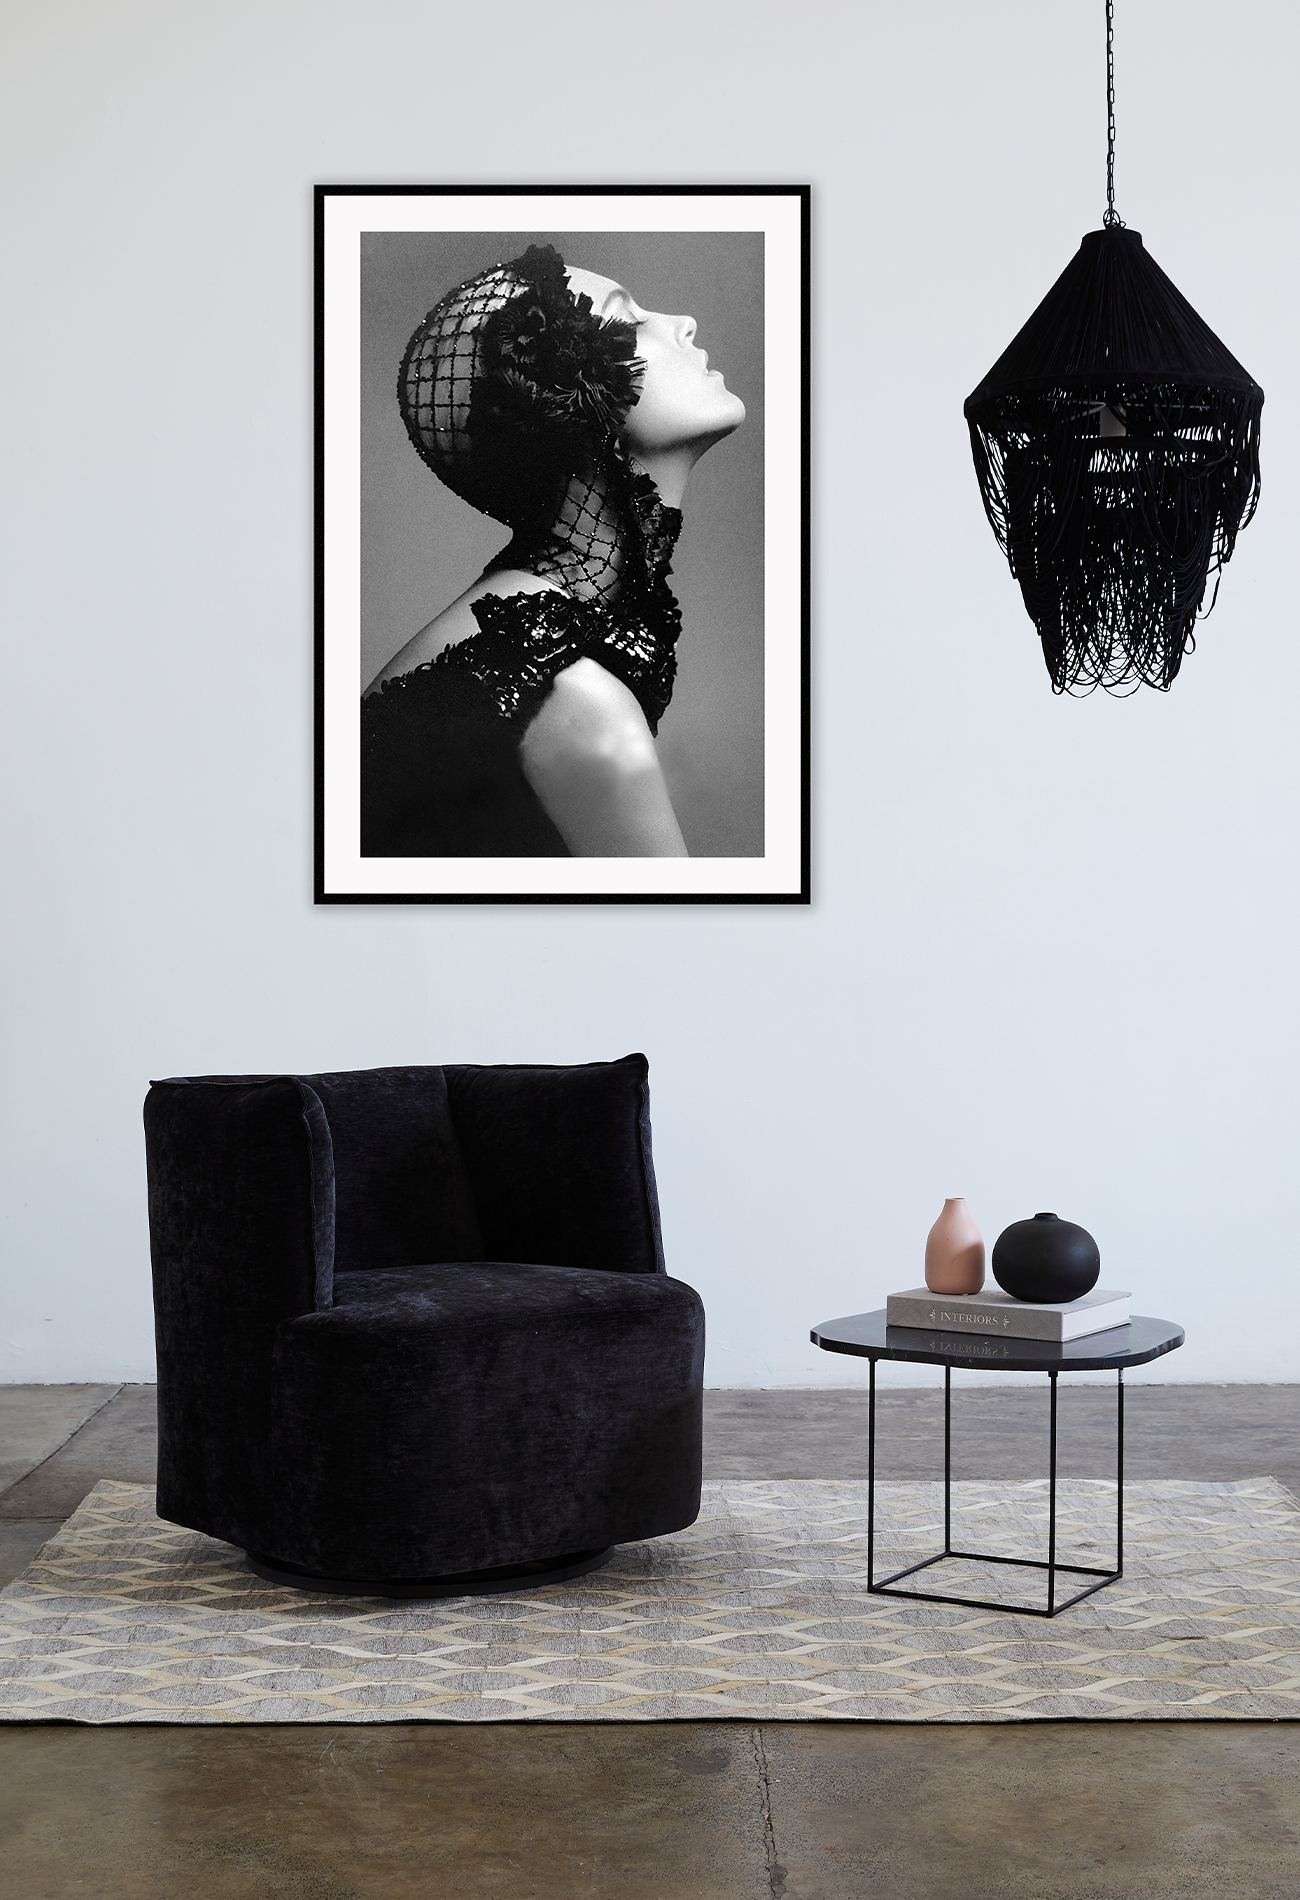 Coco Chanel Pictures Wall  Coco Chanel Home Decoration  Coco Chanel  Pictures Style  Painting  Calligraphy  Aliexpress